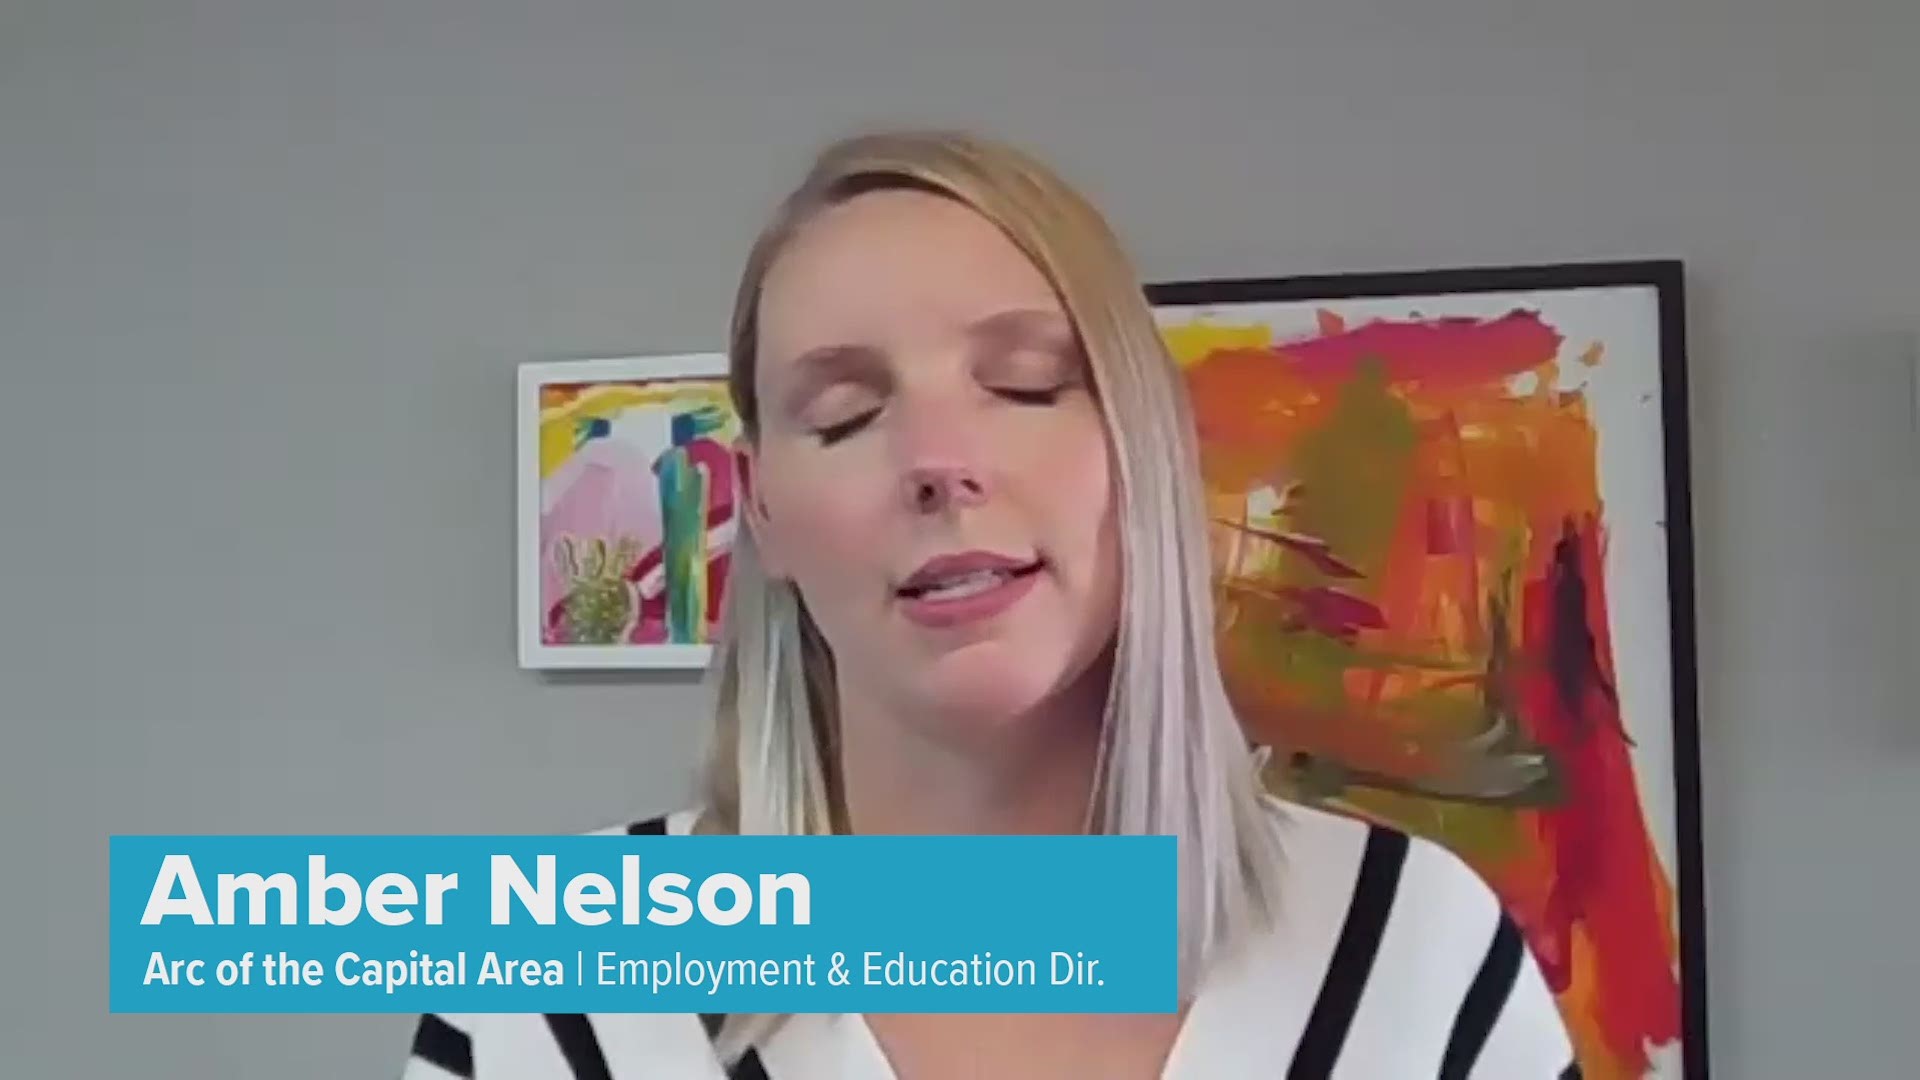 Interview with The Arc of the Capital Area’s Director of Art and Education, Amber Nelson